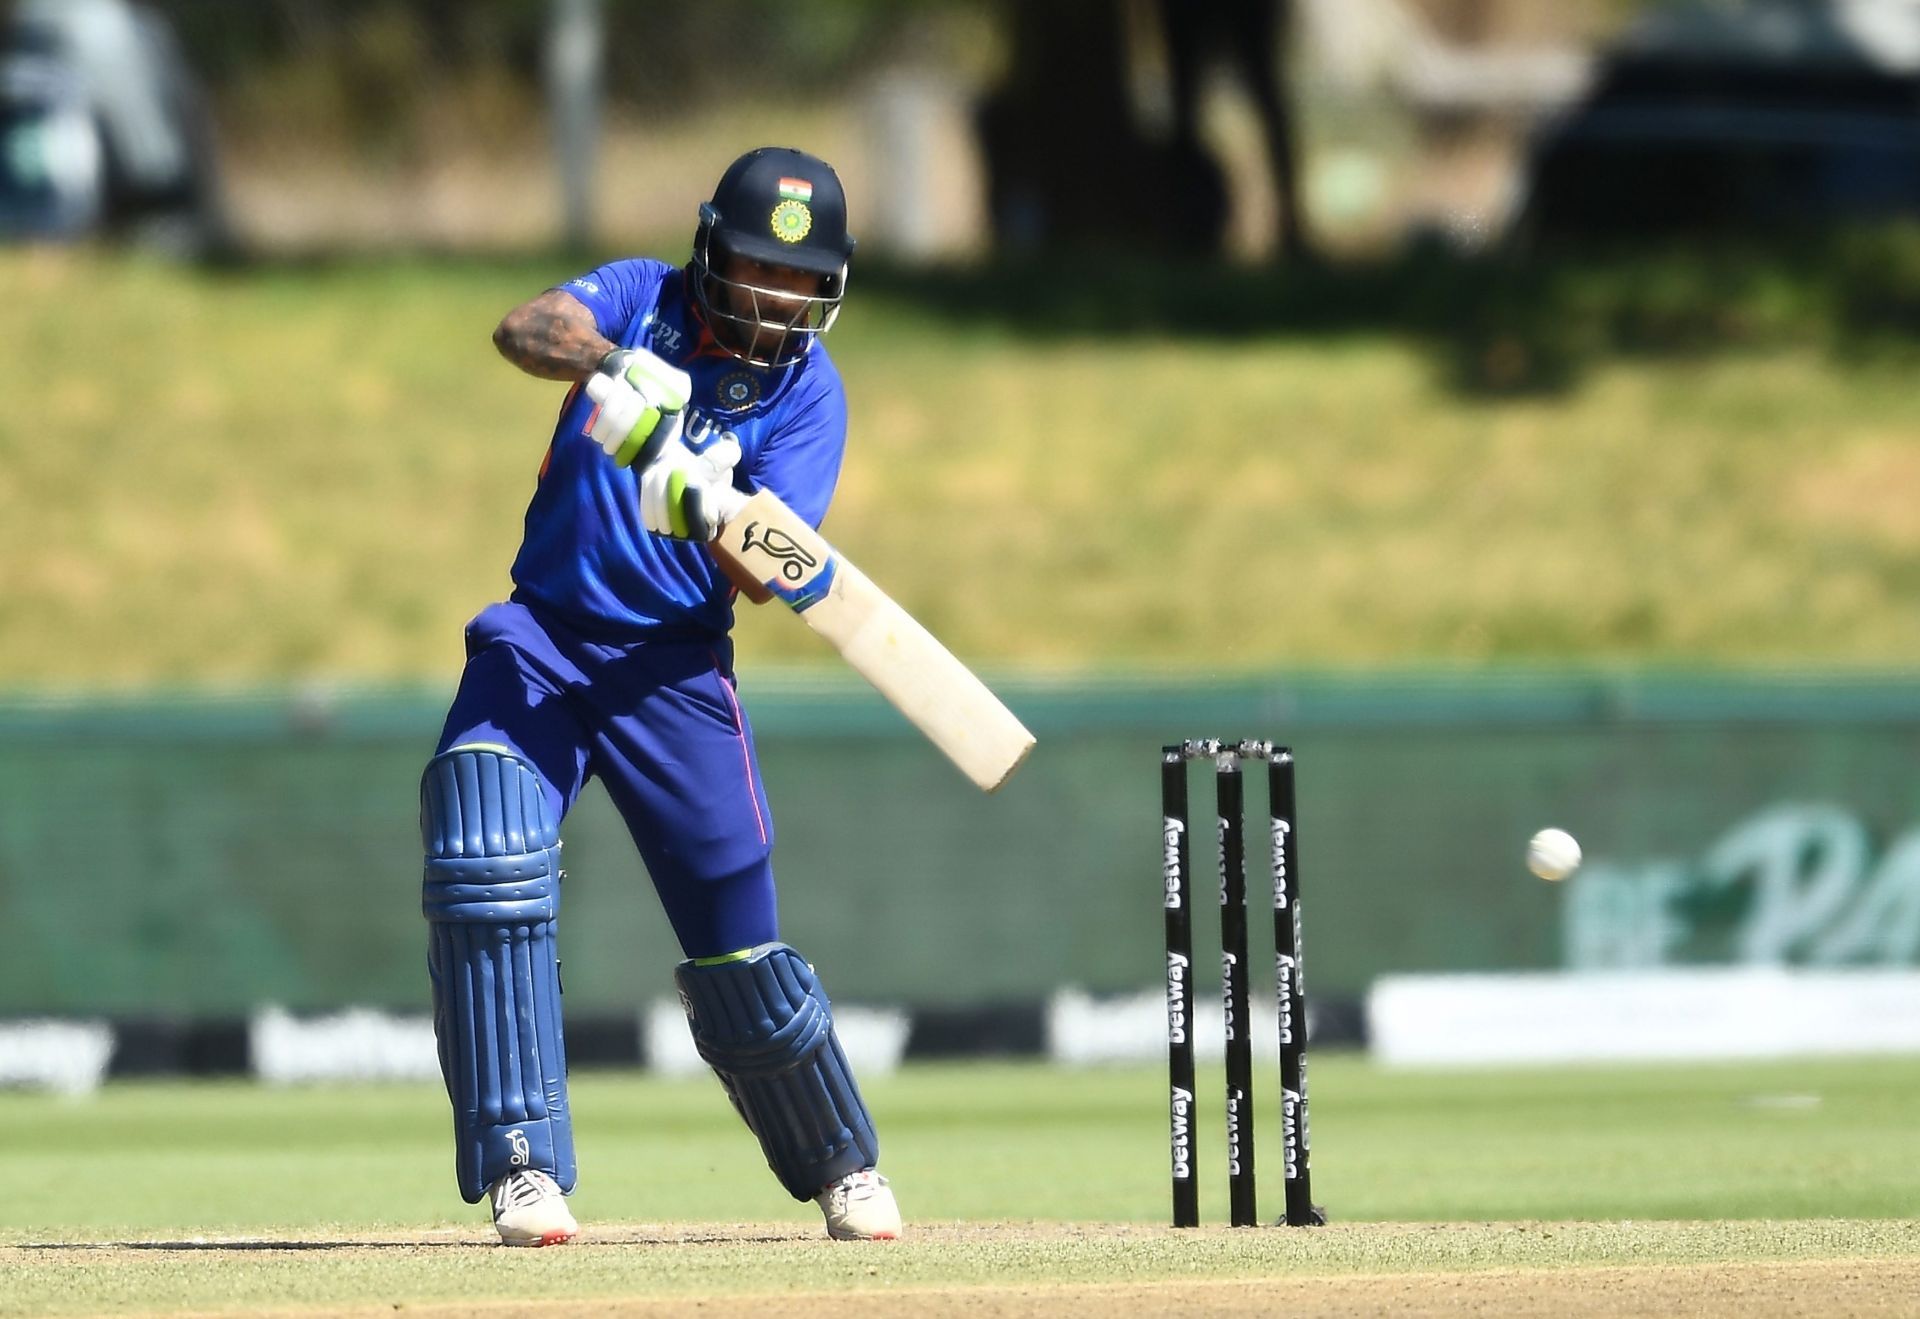 Dhawan looked close to his best at Paarl